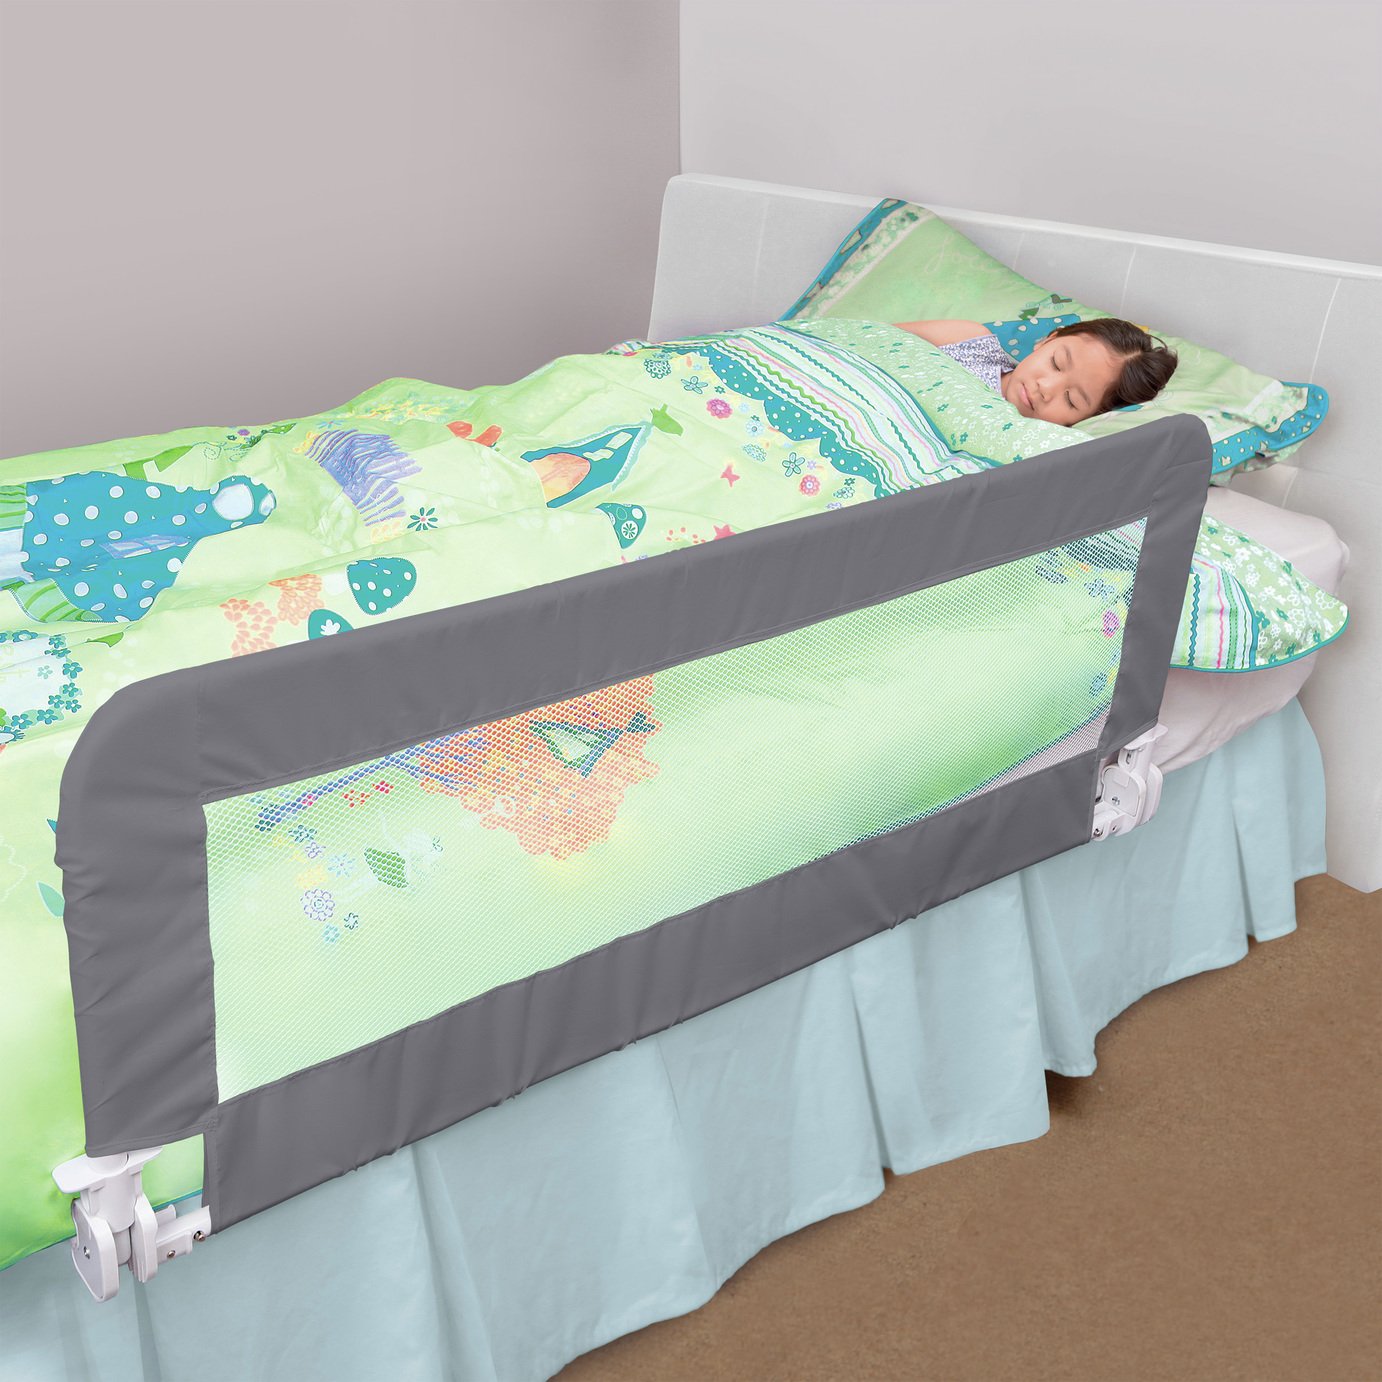 Dreambaby Phoenix Foldable Bedrail 110Wide x 45.5High Review